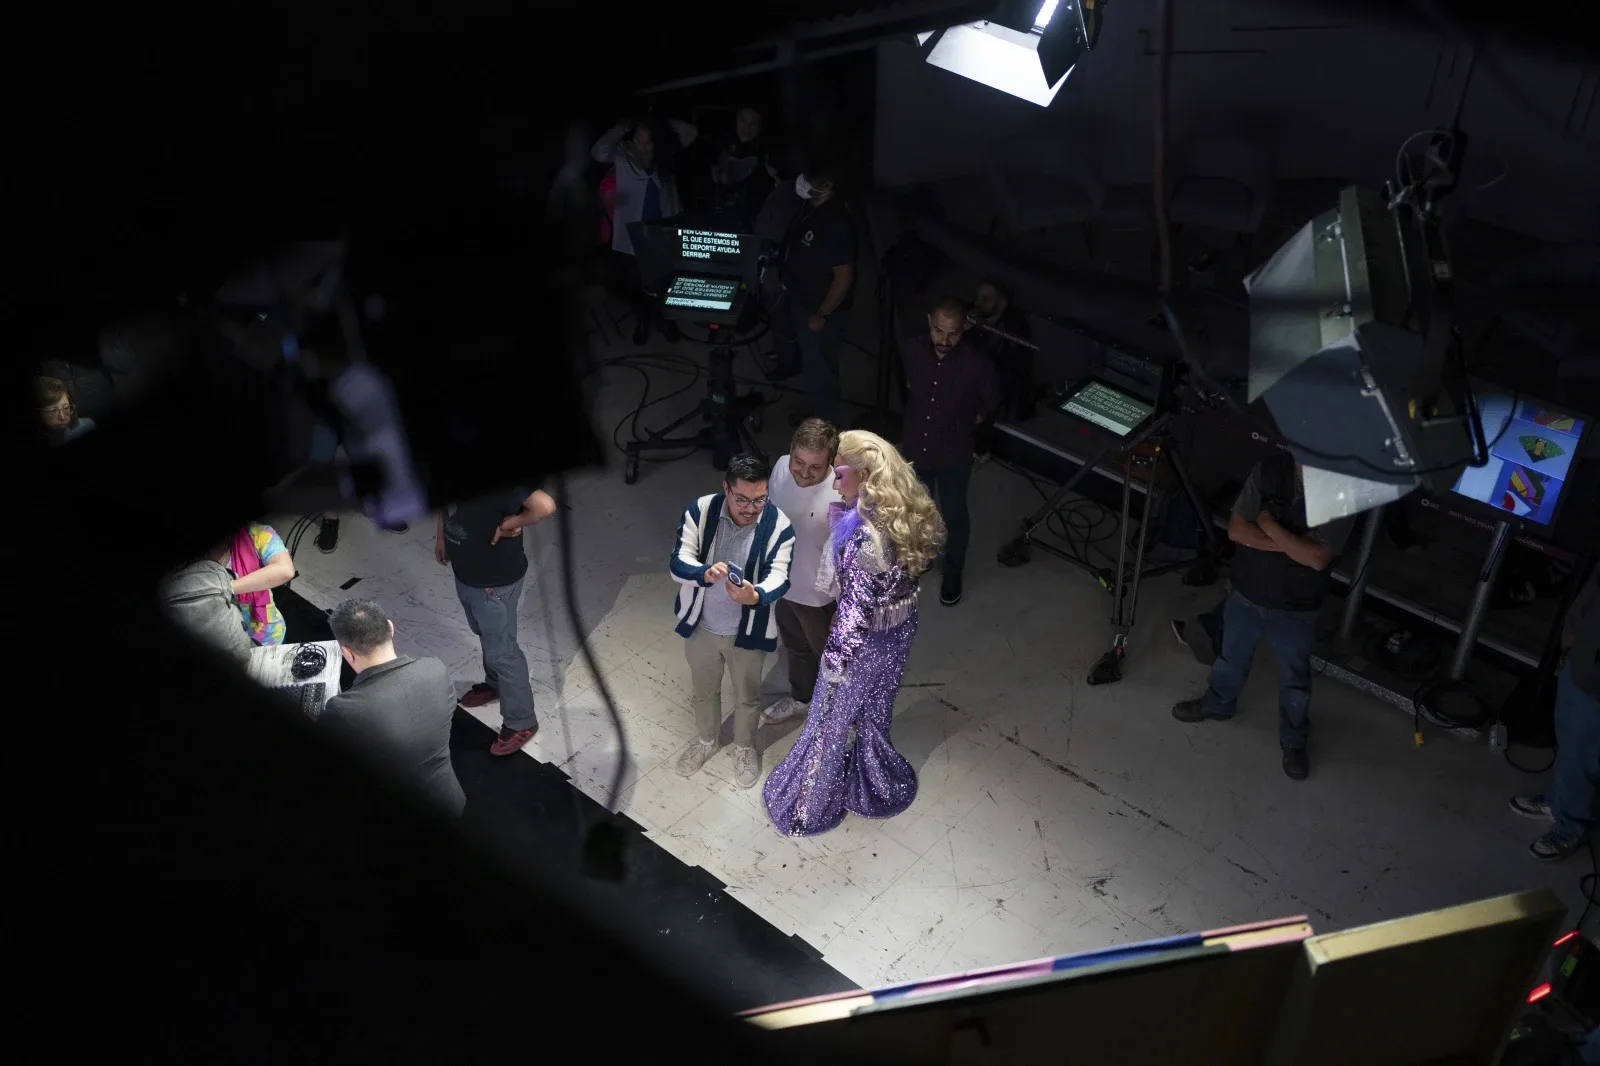 Drag news anchor Amanda, right, talks with producers during the pre-taping of her news program “La Verdrag”, on the studio floor of Canal Once, in Mexico City, Wednesday, Oct. 11, 2023. (AP Photo/Aurea Del Rosario)